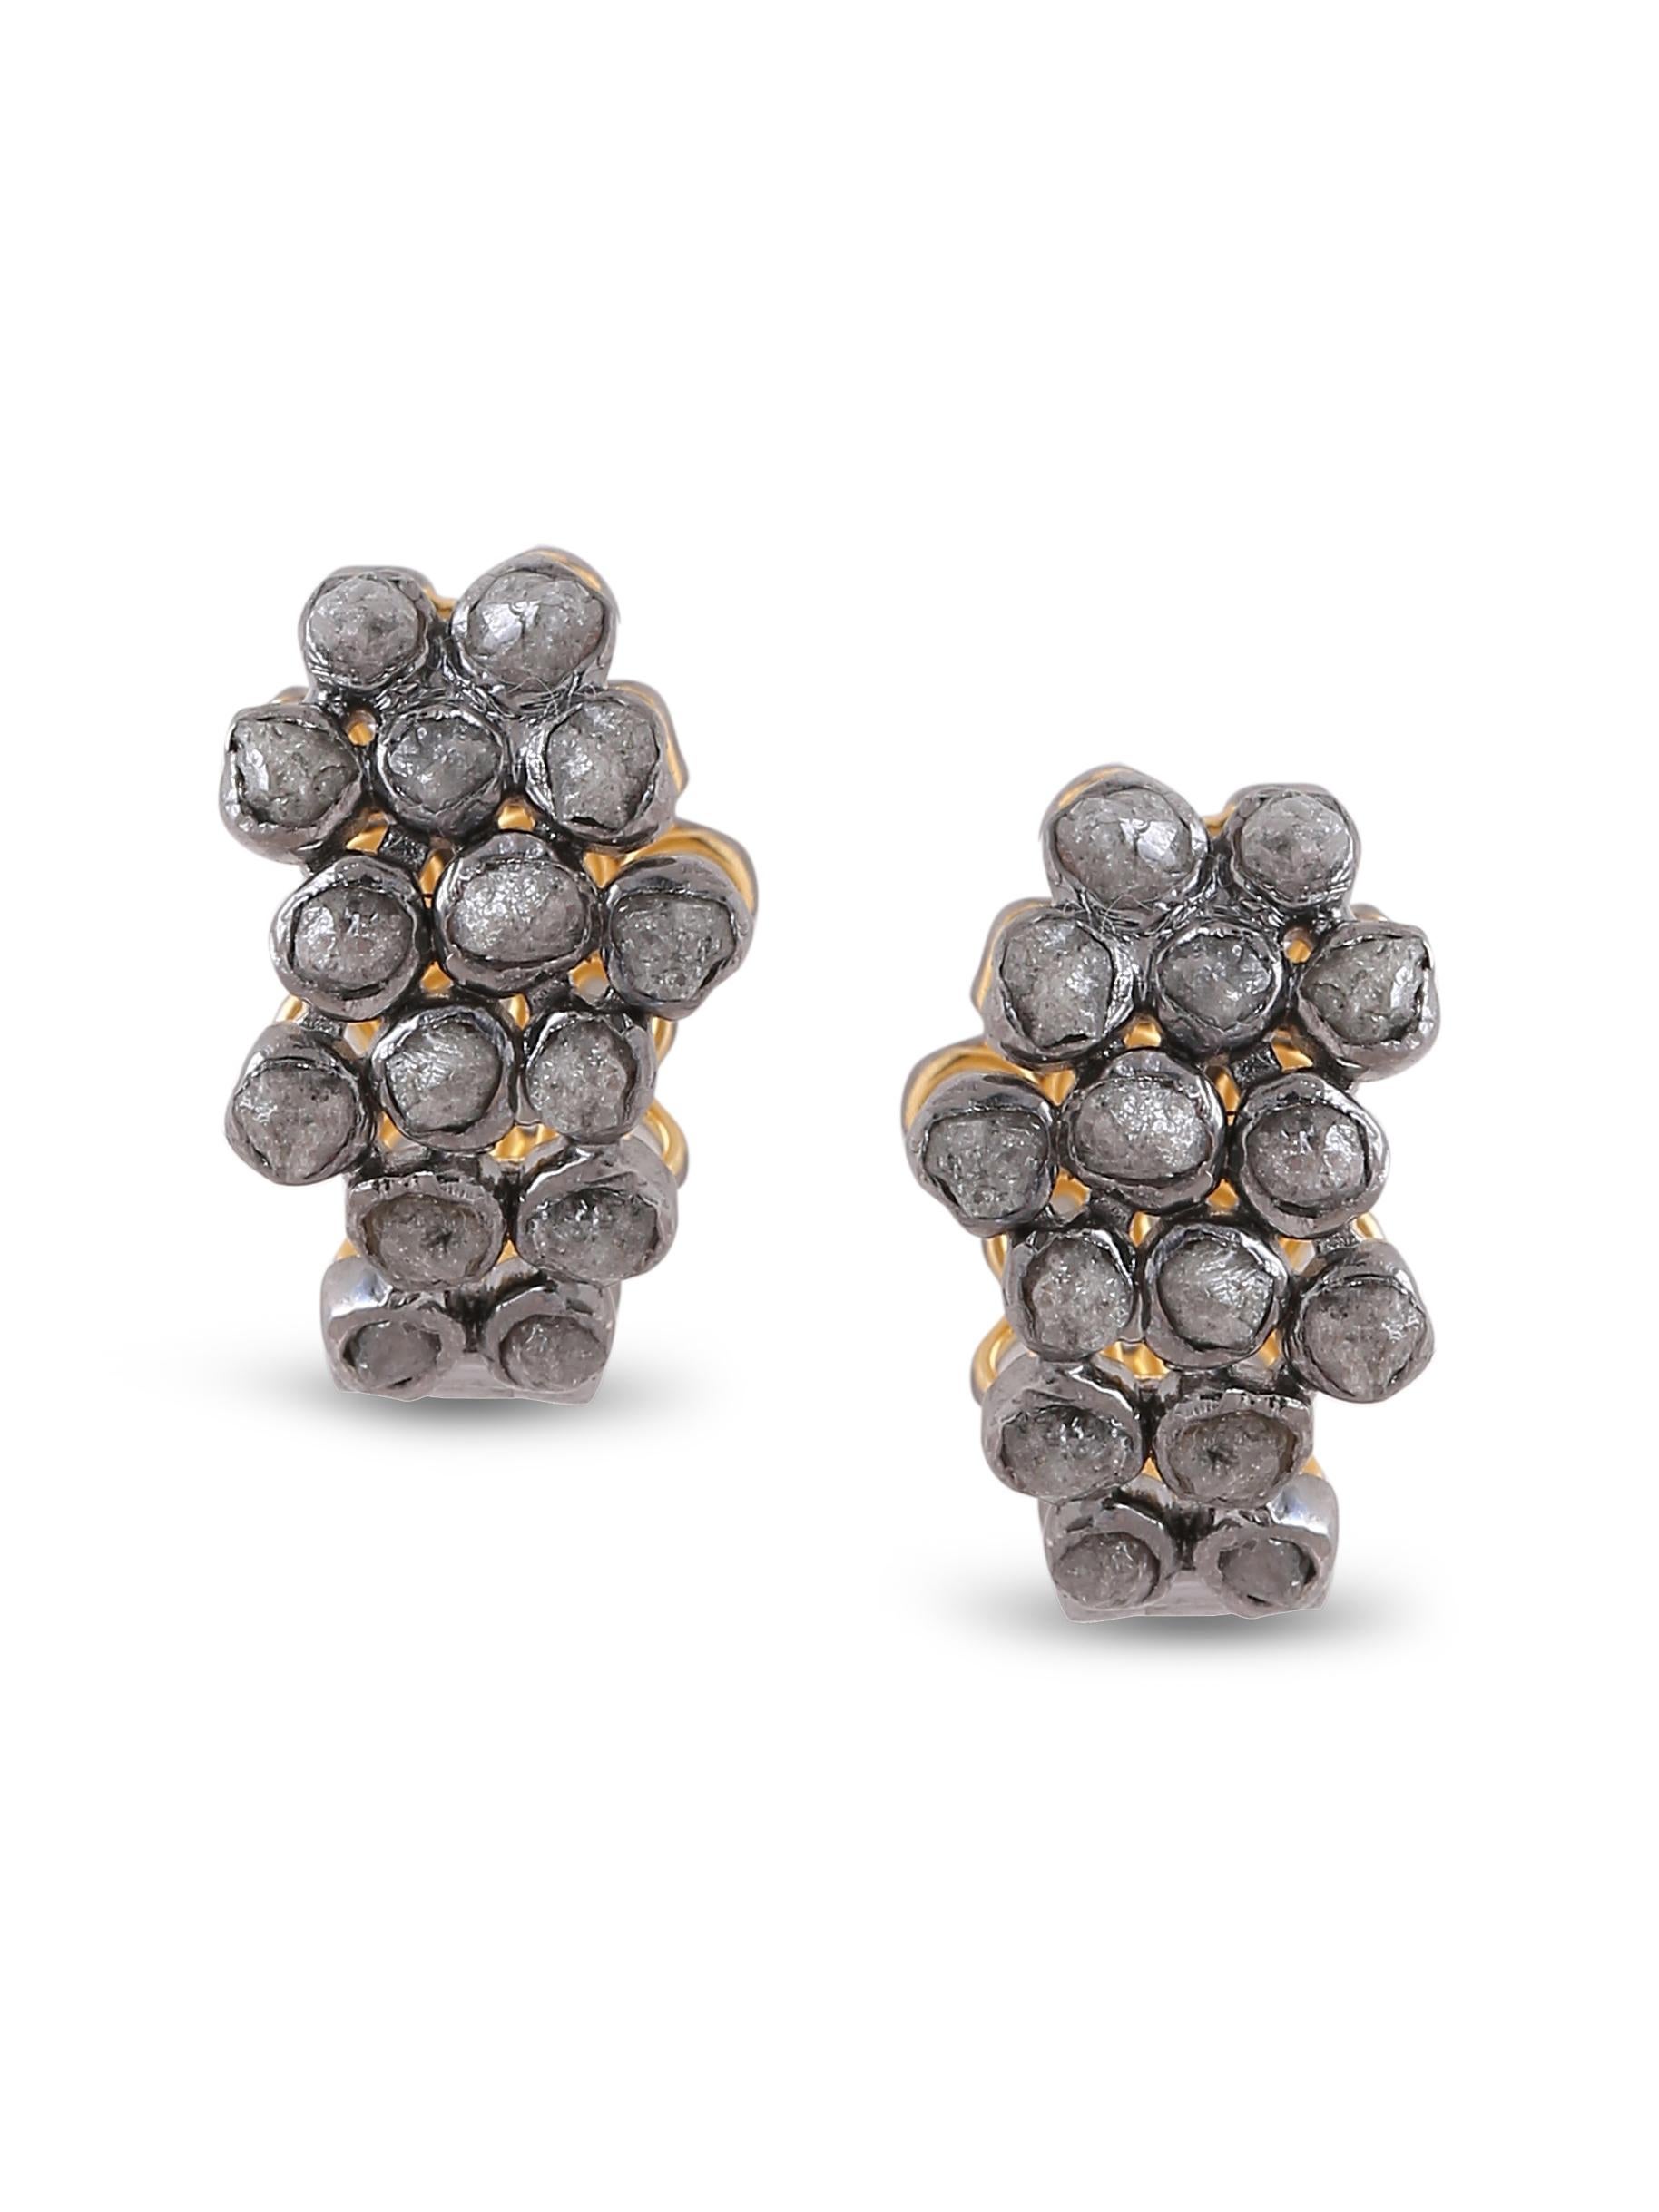 Rose Cut Adeitiy recycled silver earrings with mined diamonds and black rhodium plating